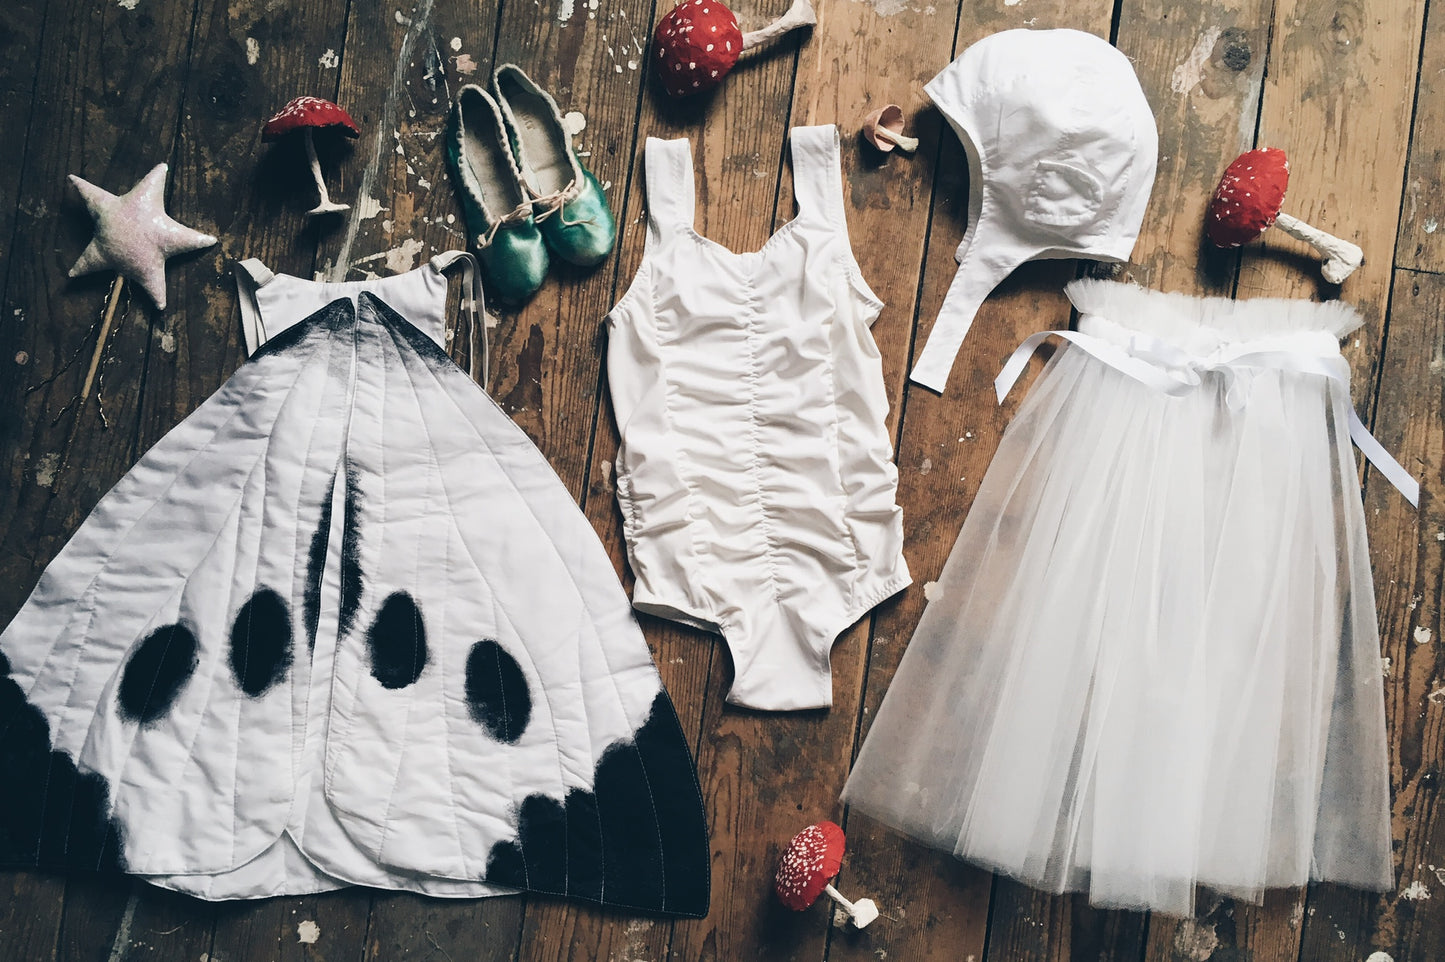 flat lay of a Childs Flower fairies costume on wooden floorboards